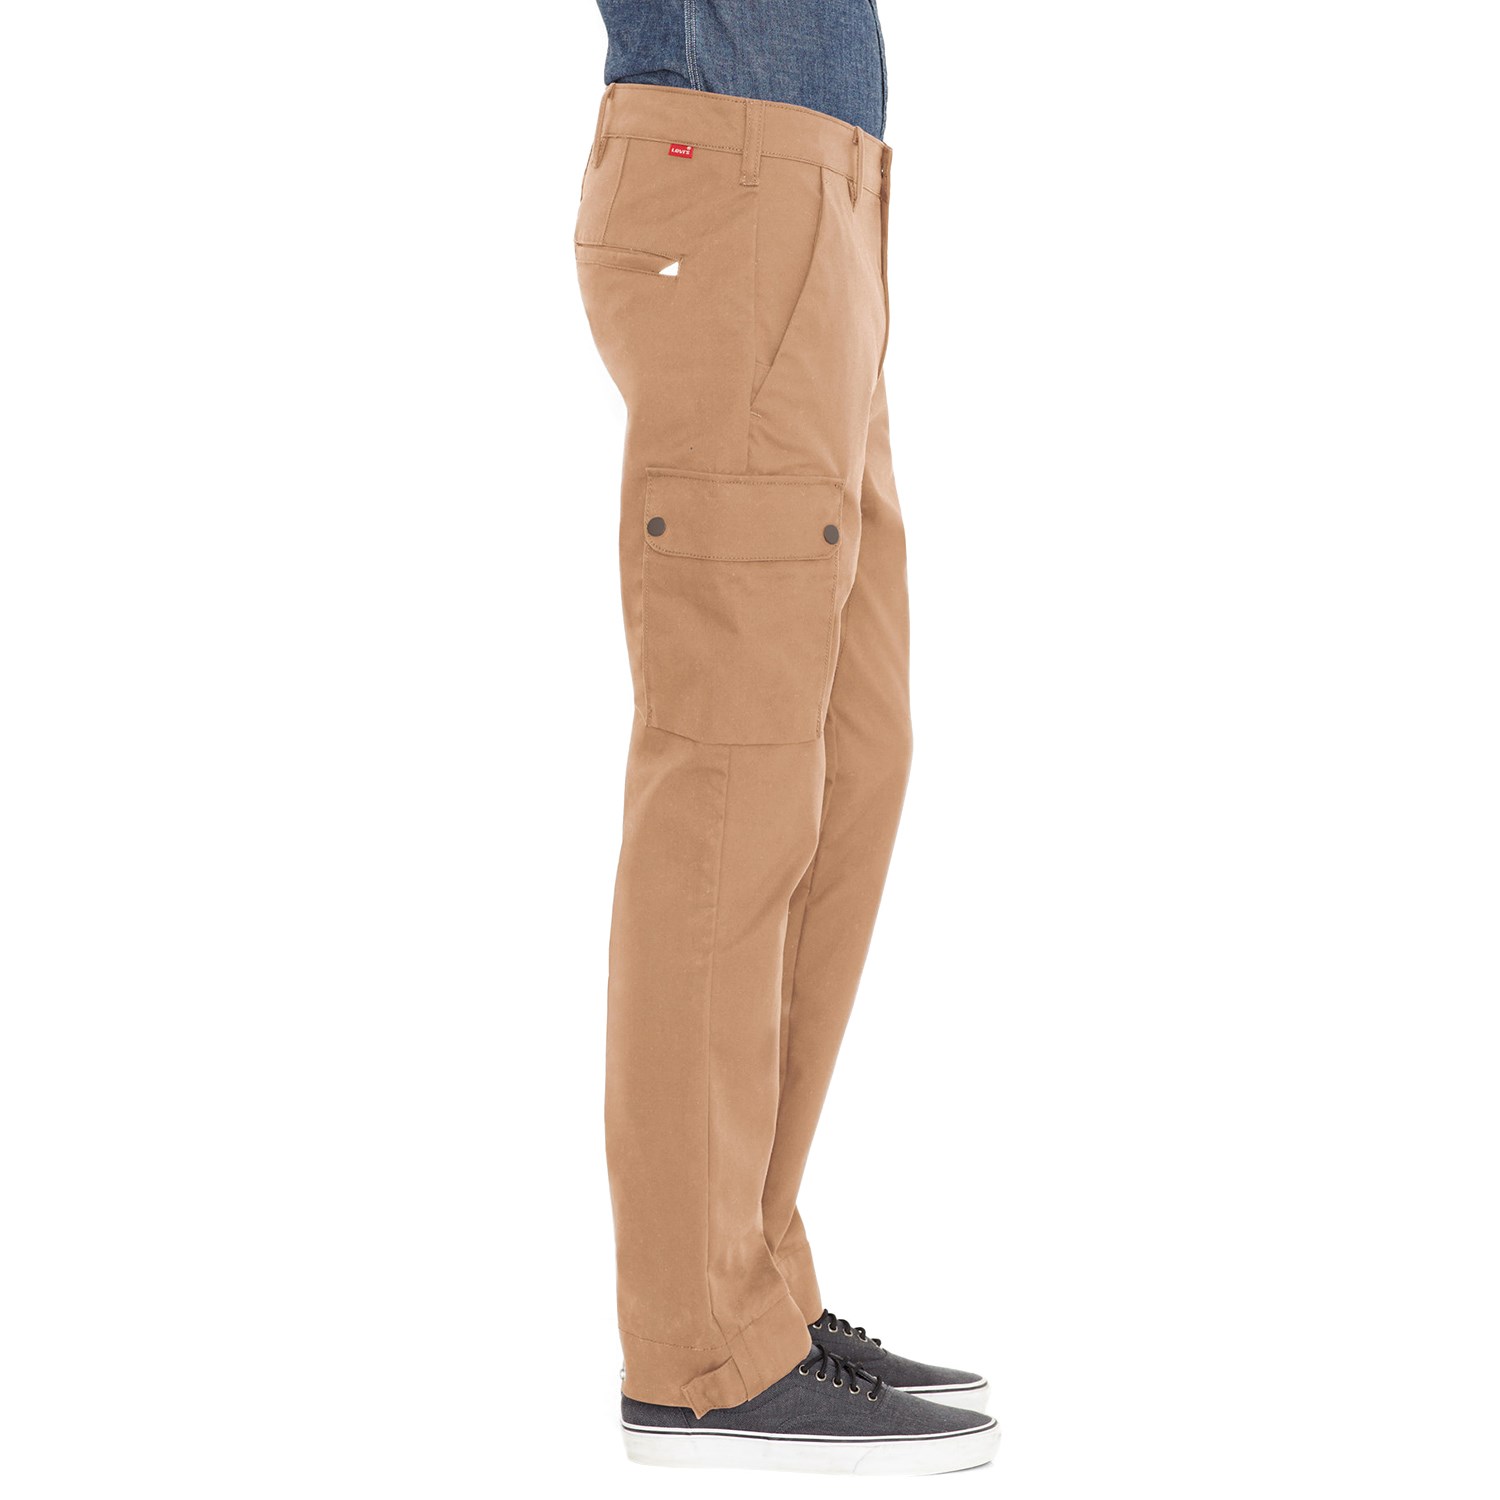 cinched cargo pants